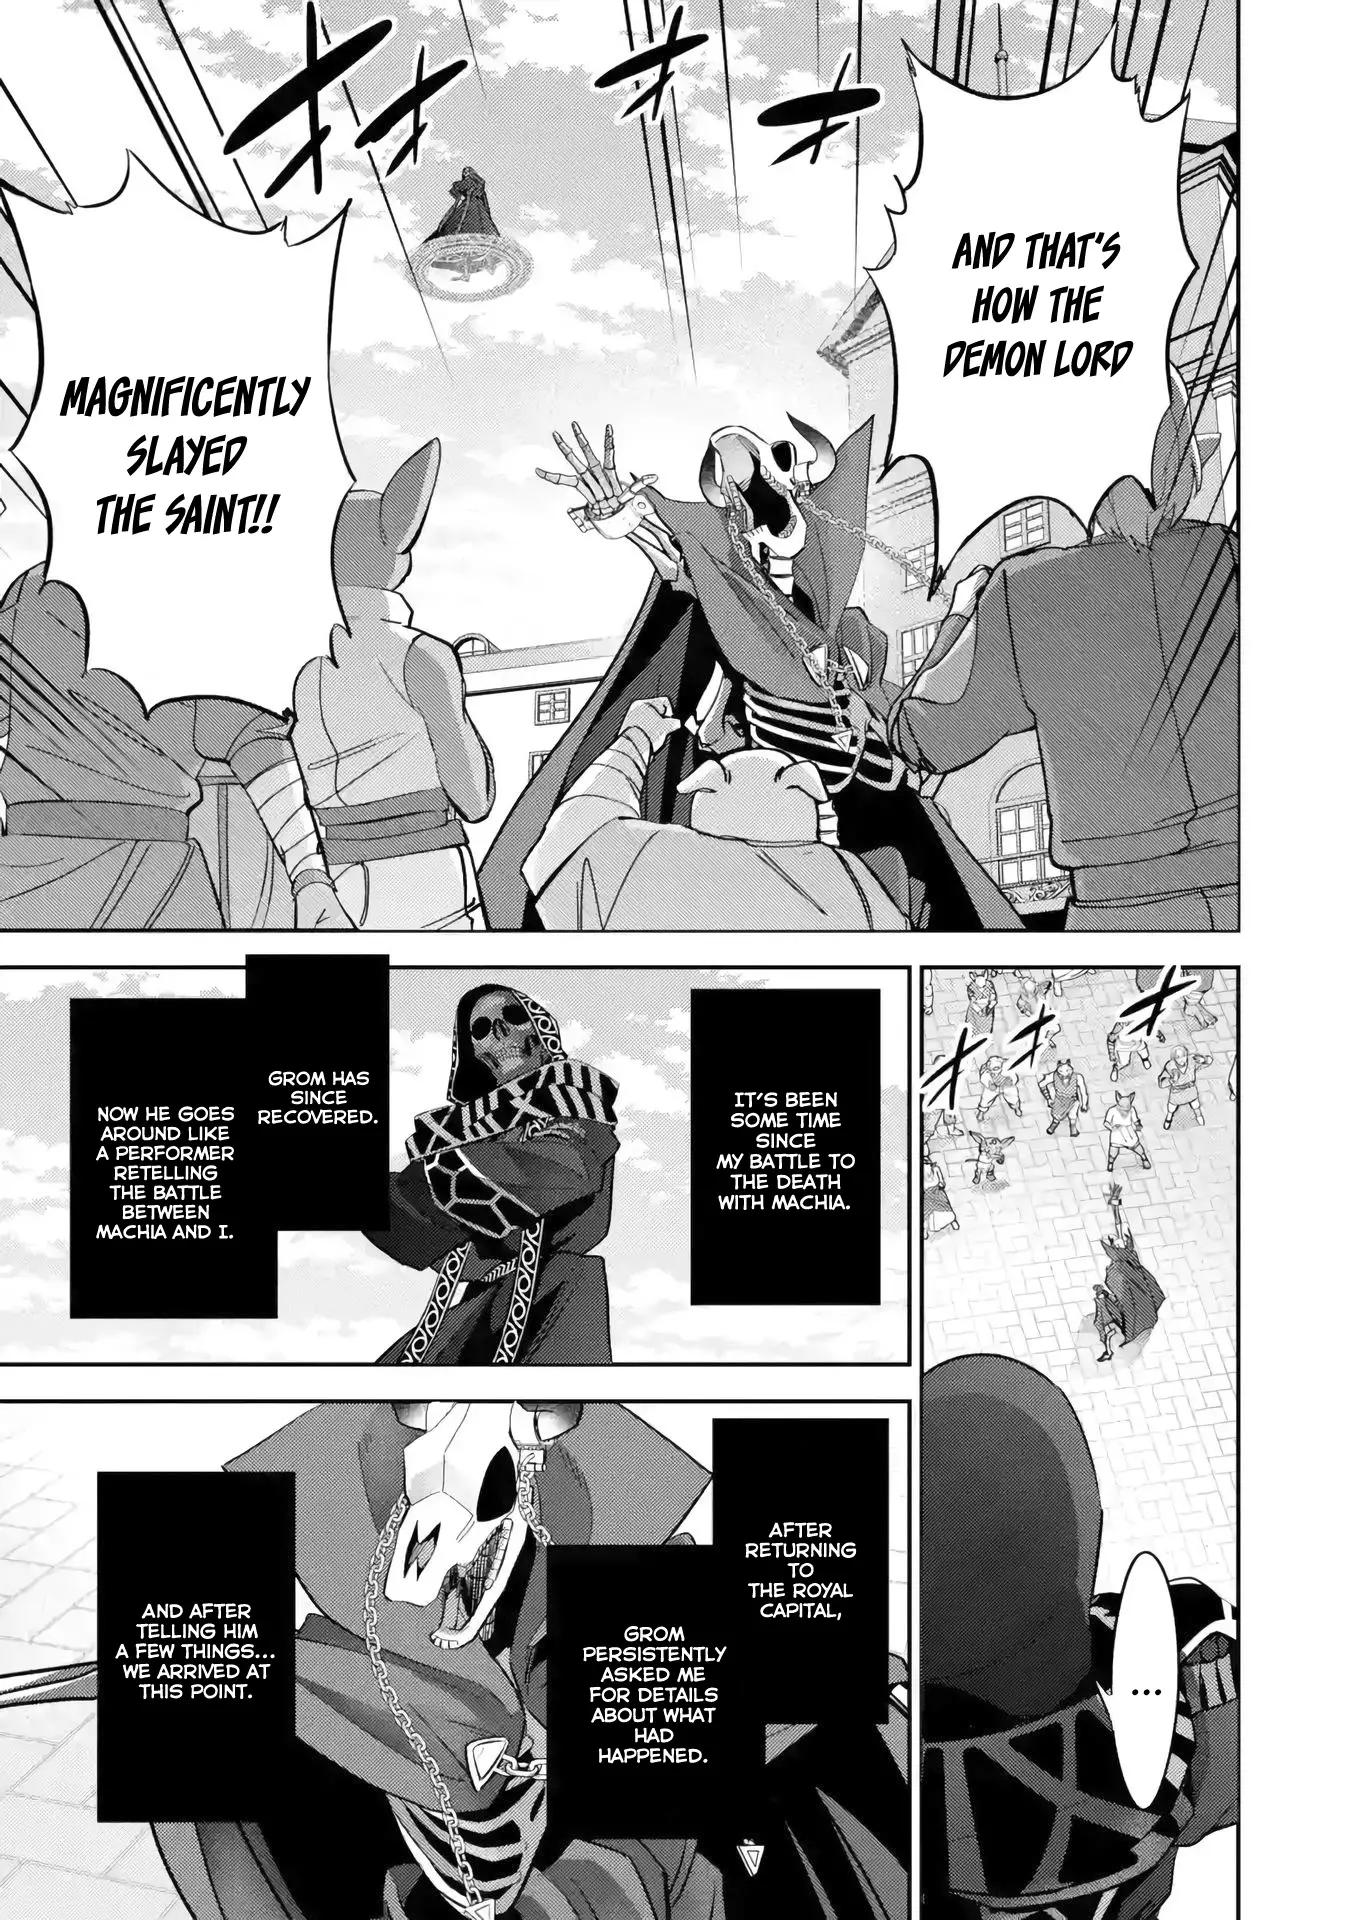 The Executed Sage Who Was Reincarnated As A Lich And Started An All-Out War - 29 page 4-82619453